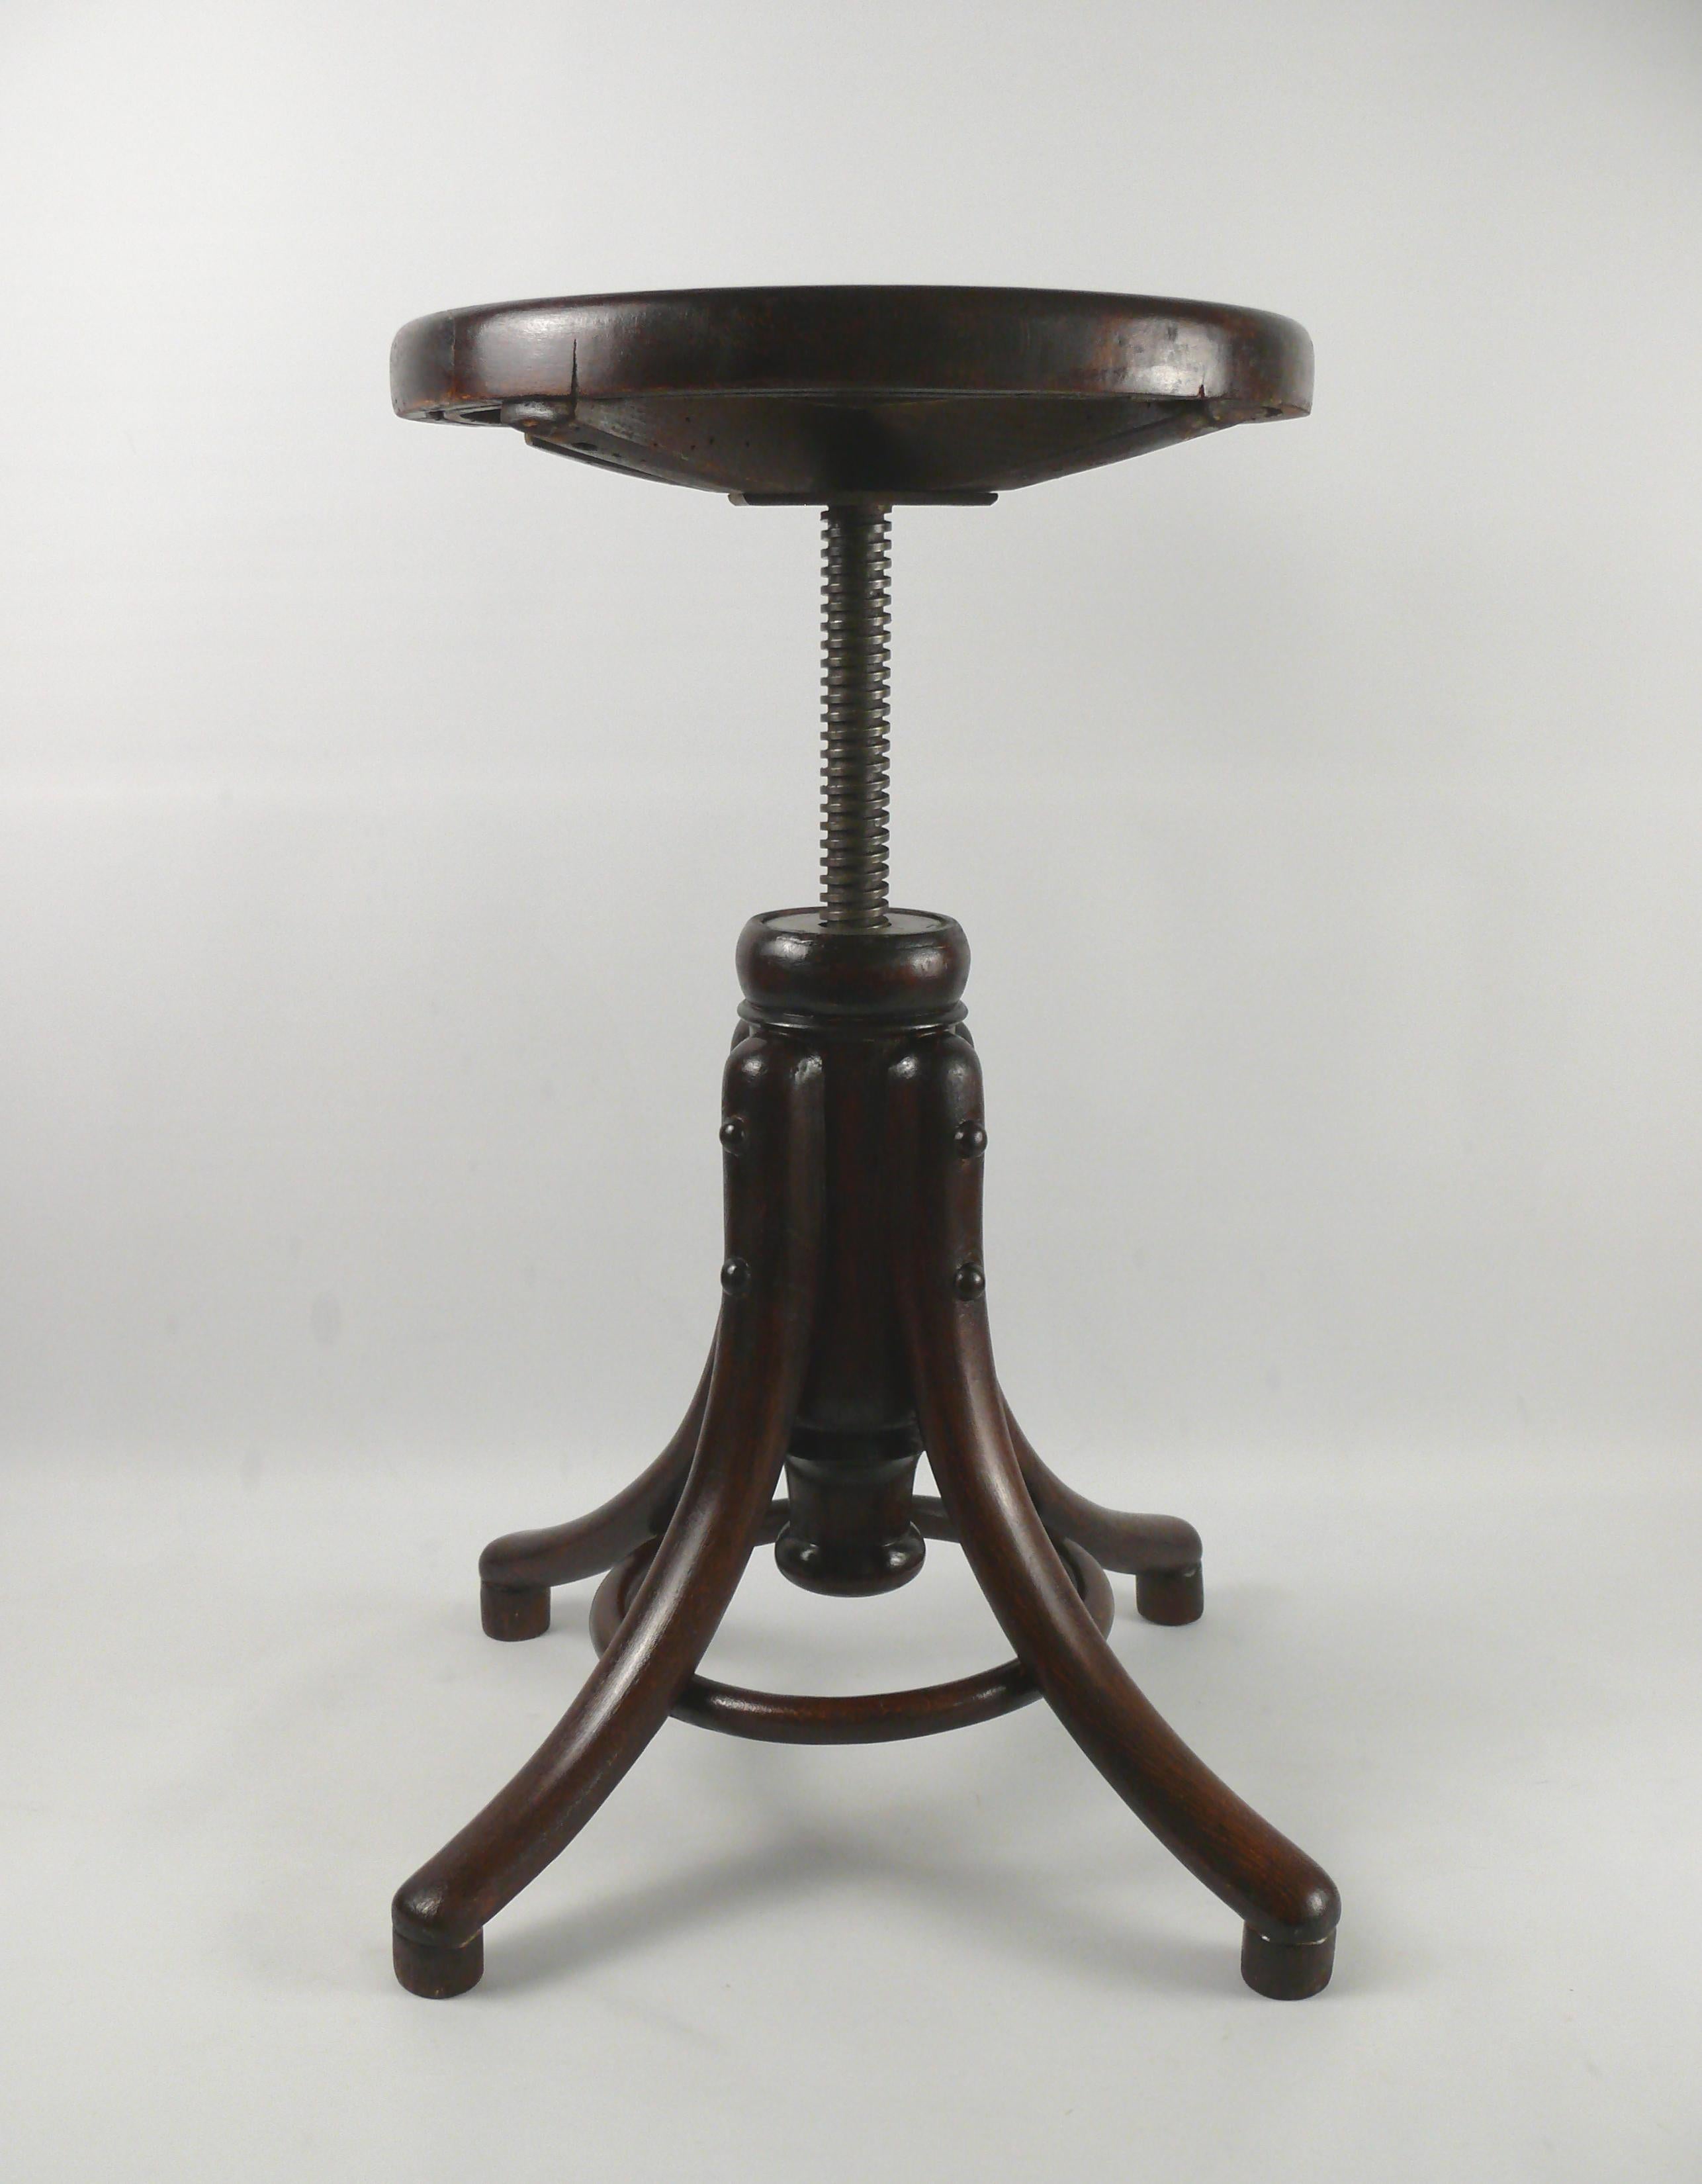 German Solid Piano Stool, Early 20th Century